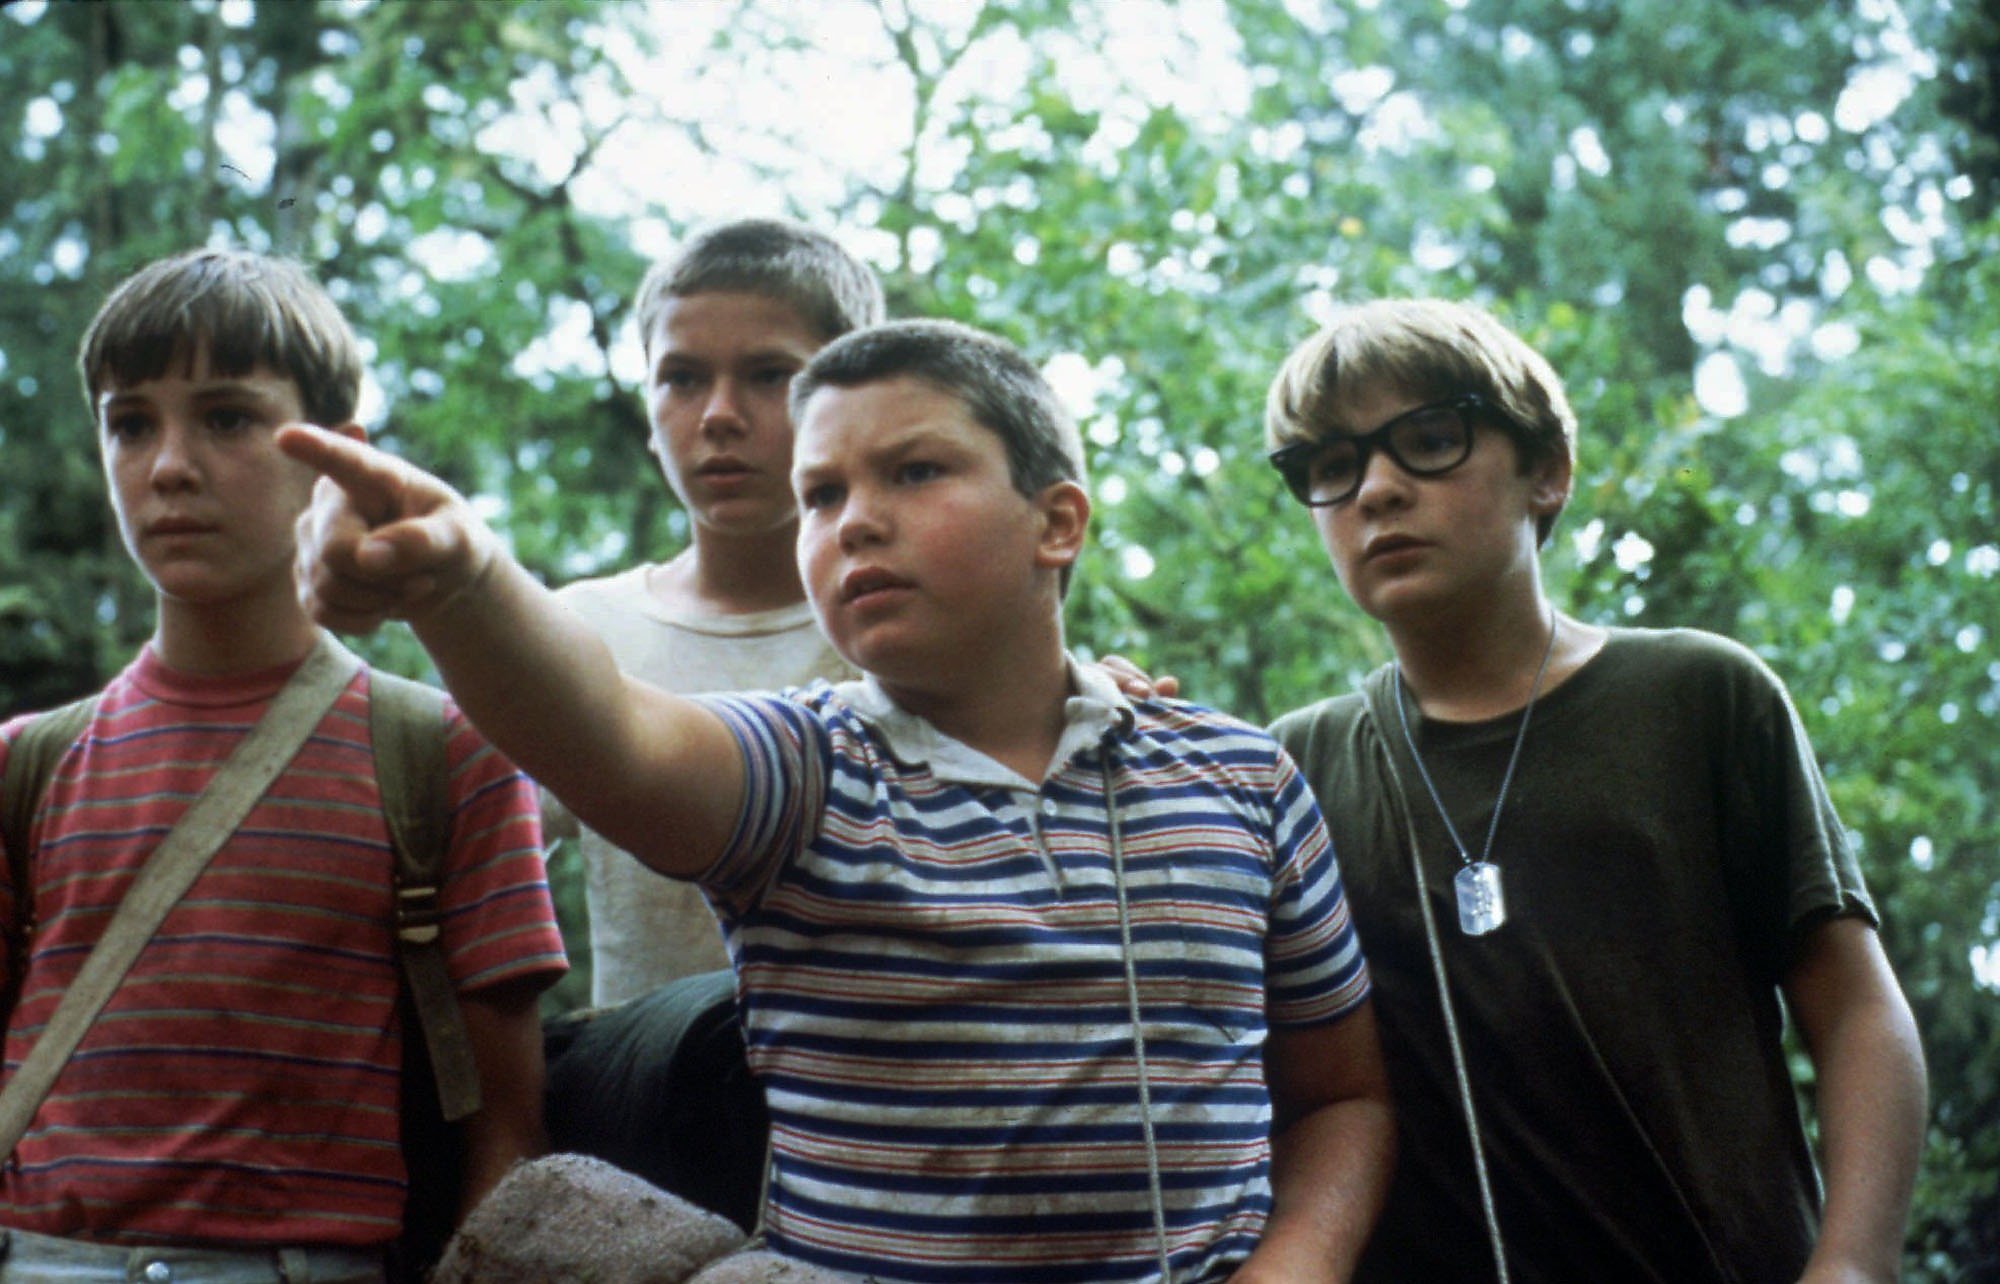 movie, stand by me (1986), corey feldman, jerry o'connell, river phoenix, wil wheaton